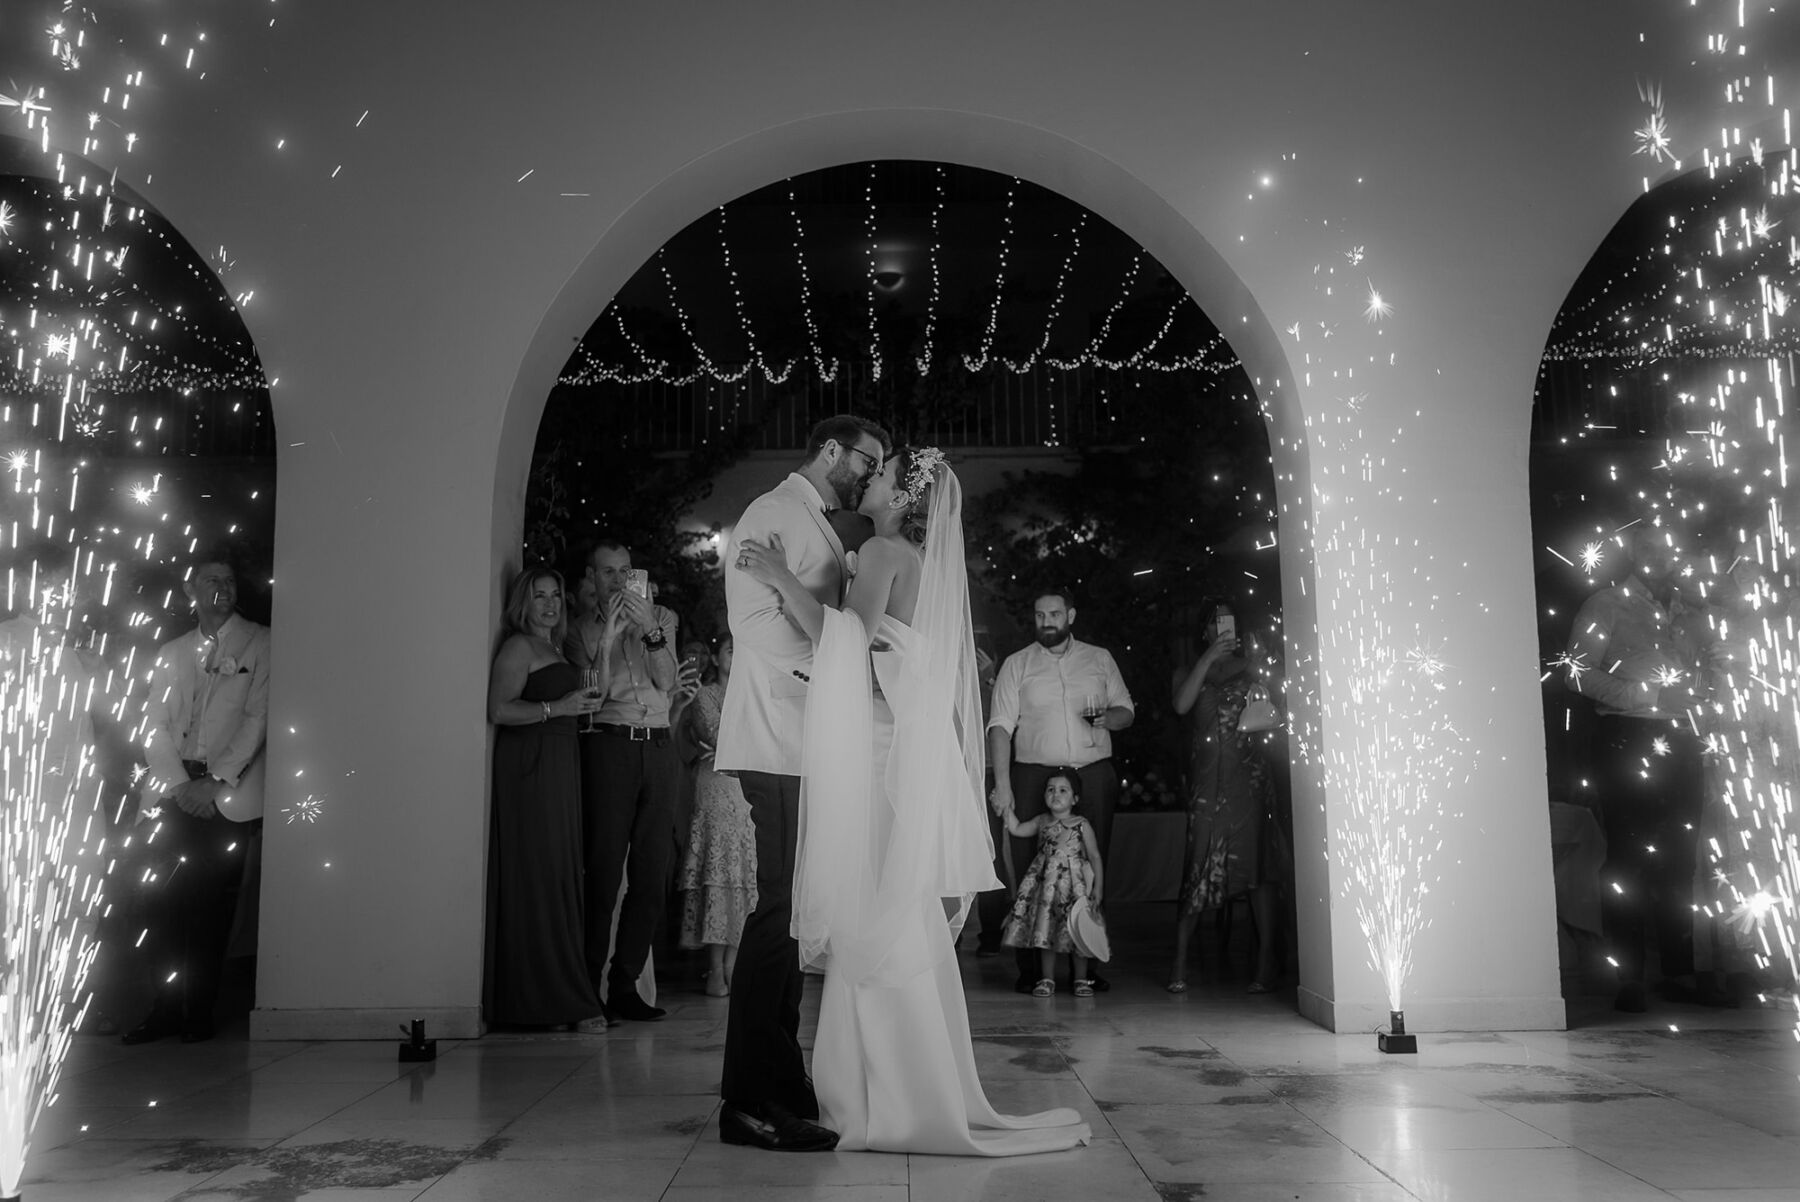 Bride and groom first dance with sparklers.